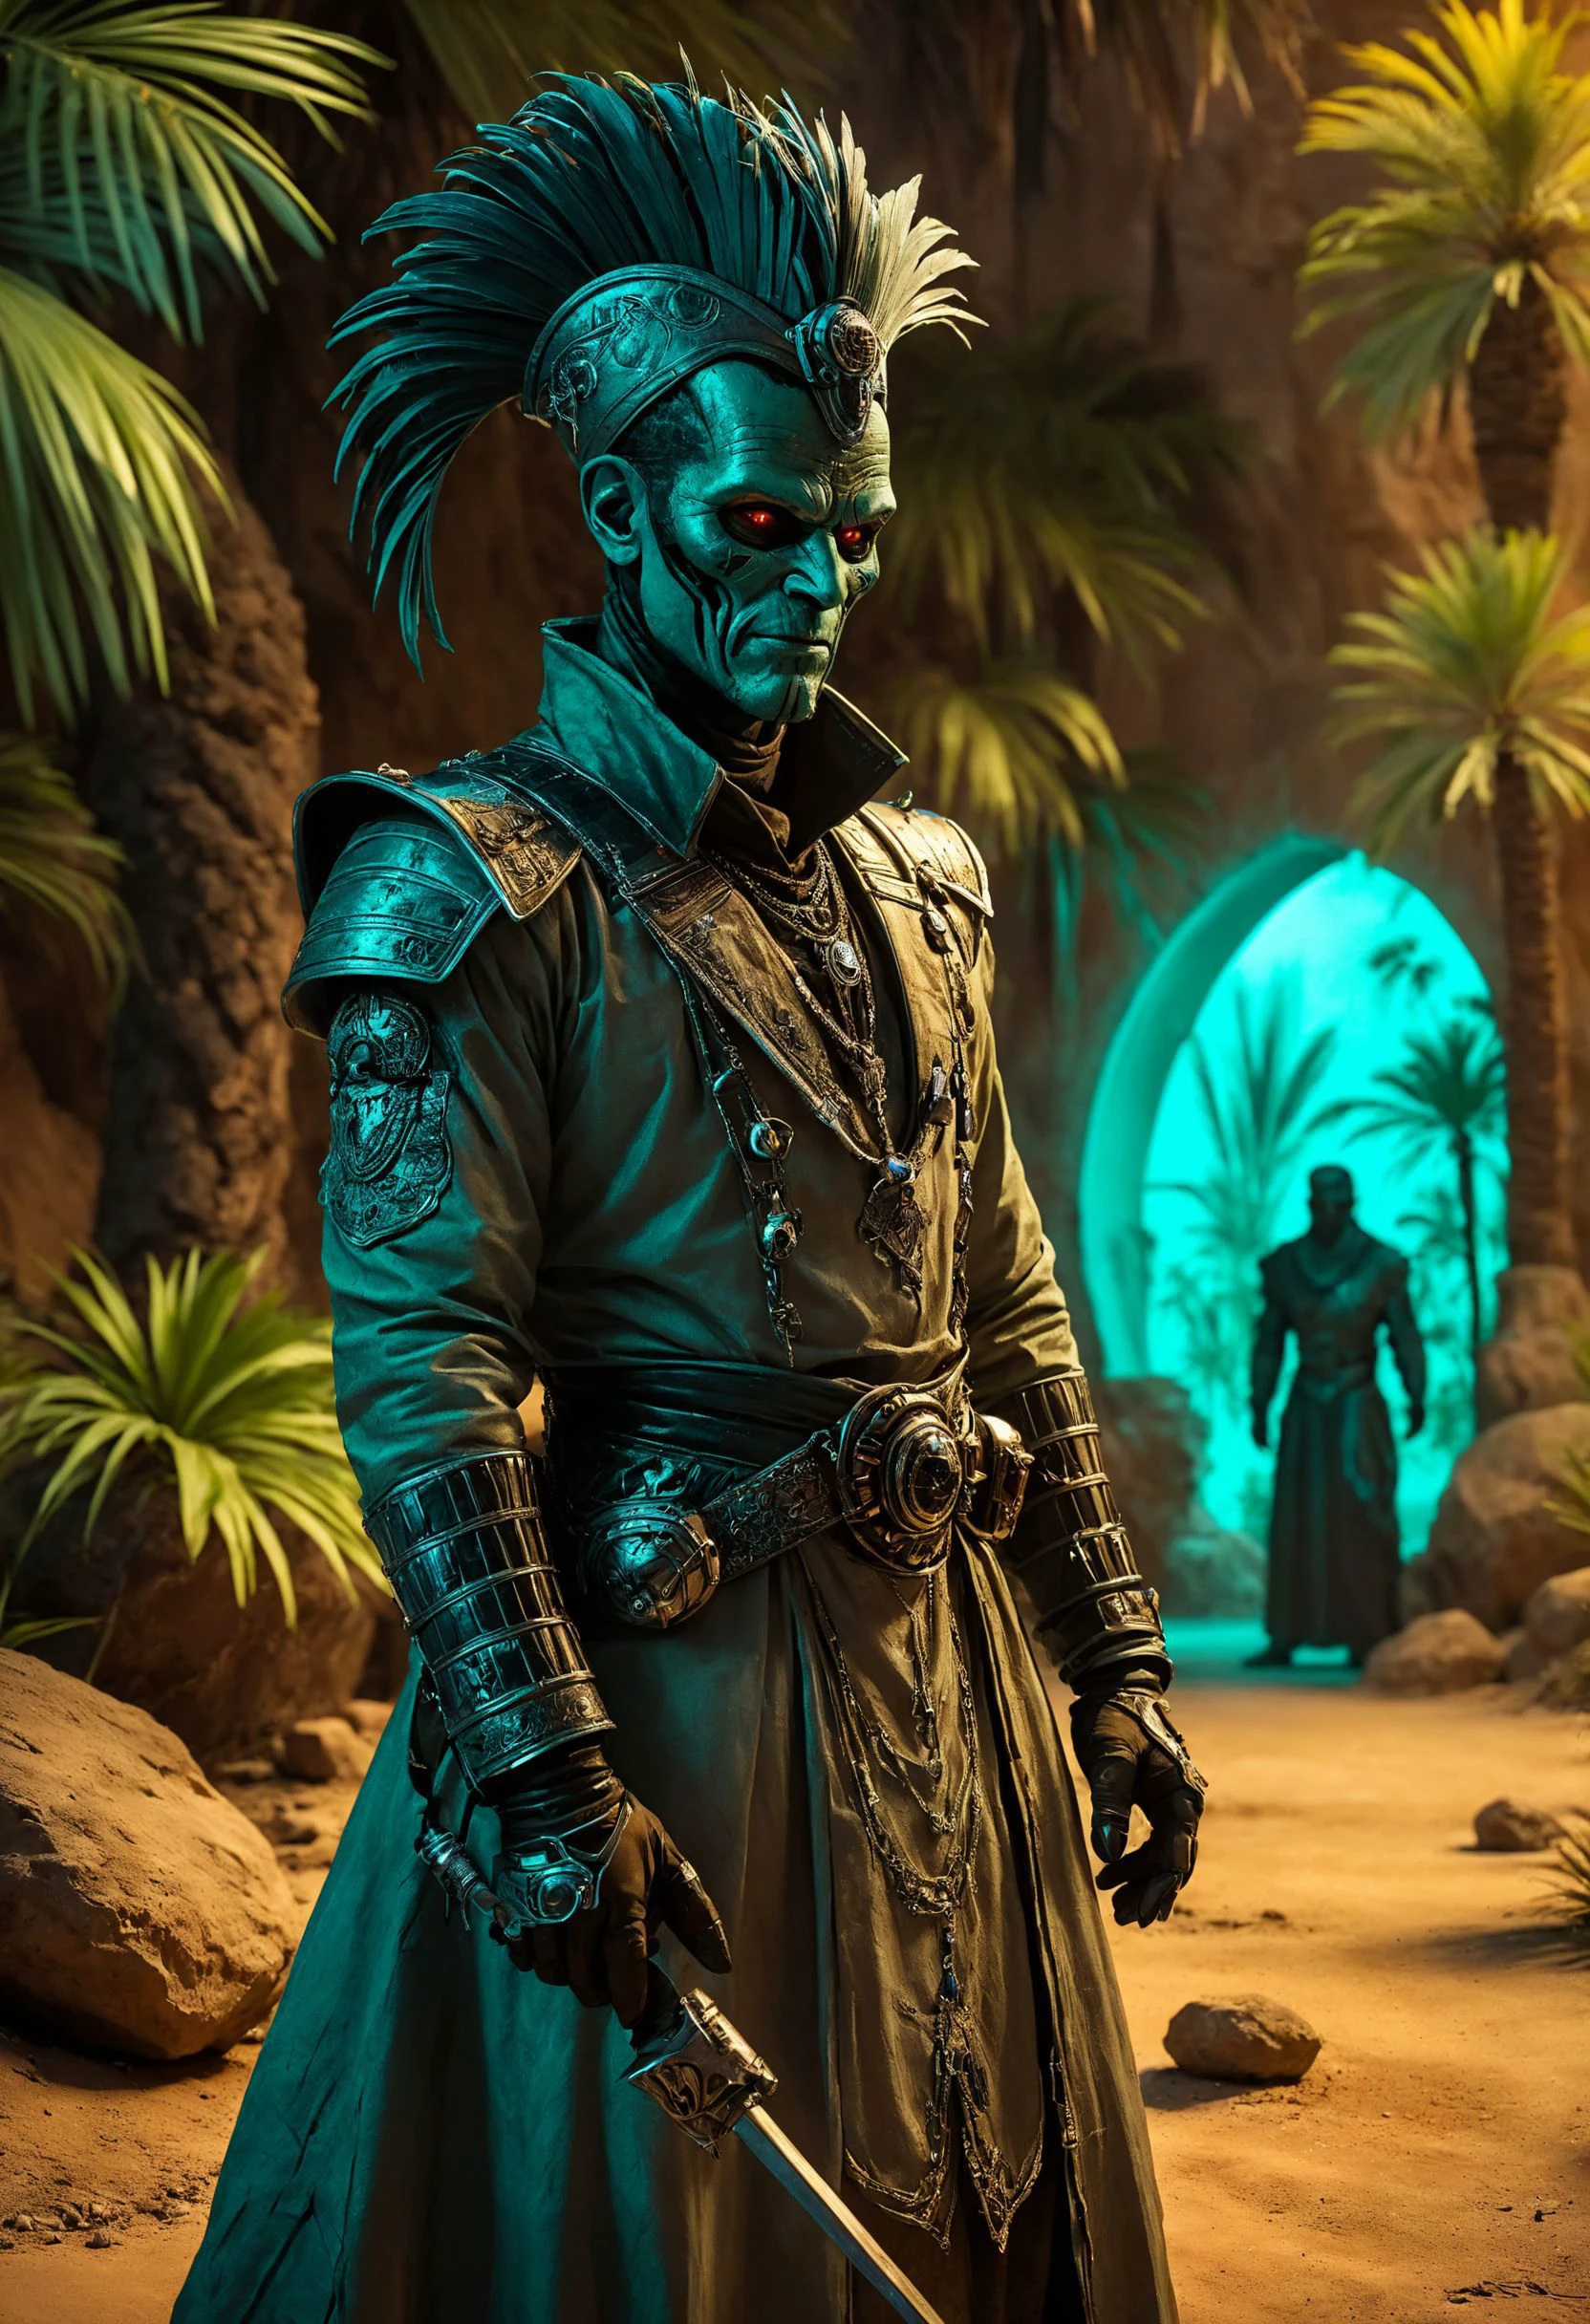 evil villain Underground surgeon specializing in cyber-enhancements, Desert oasis with lush palm trees in the background, Chiaroscuro, blacklight makeup, sharp focus, highly detailed